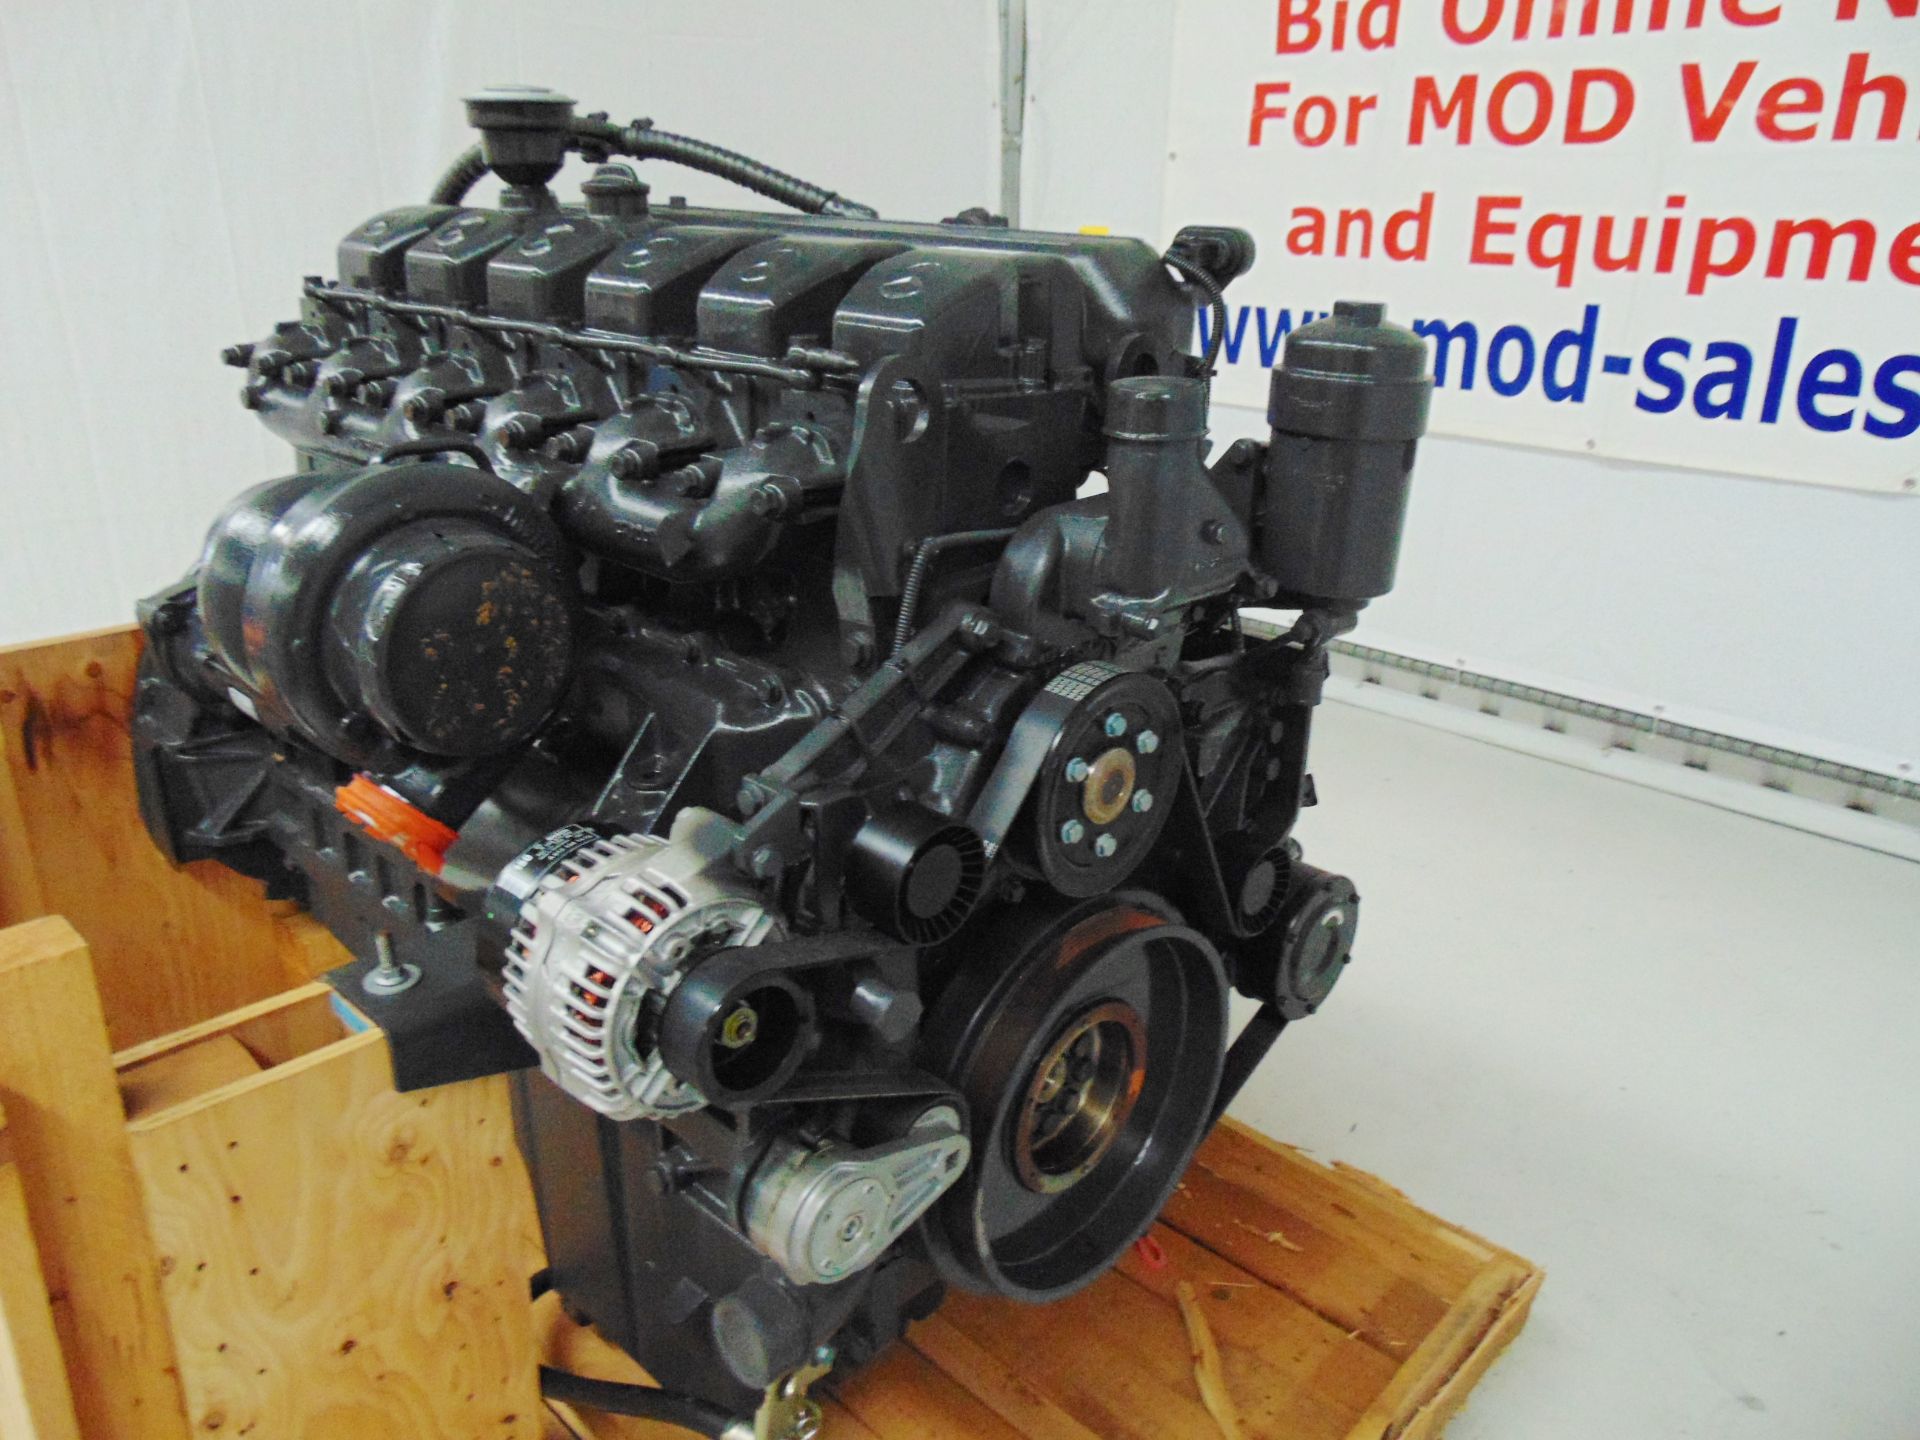 Factory Reconditioned Mercedes-Benz OM457LA Turbo Diesel Engine - Image 8 of 23